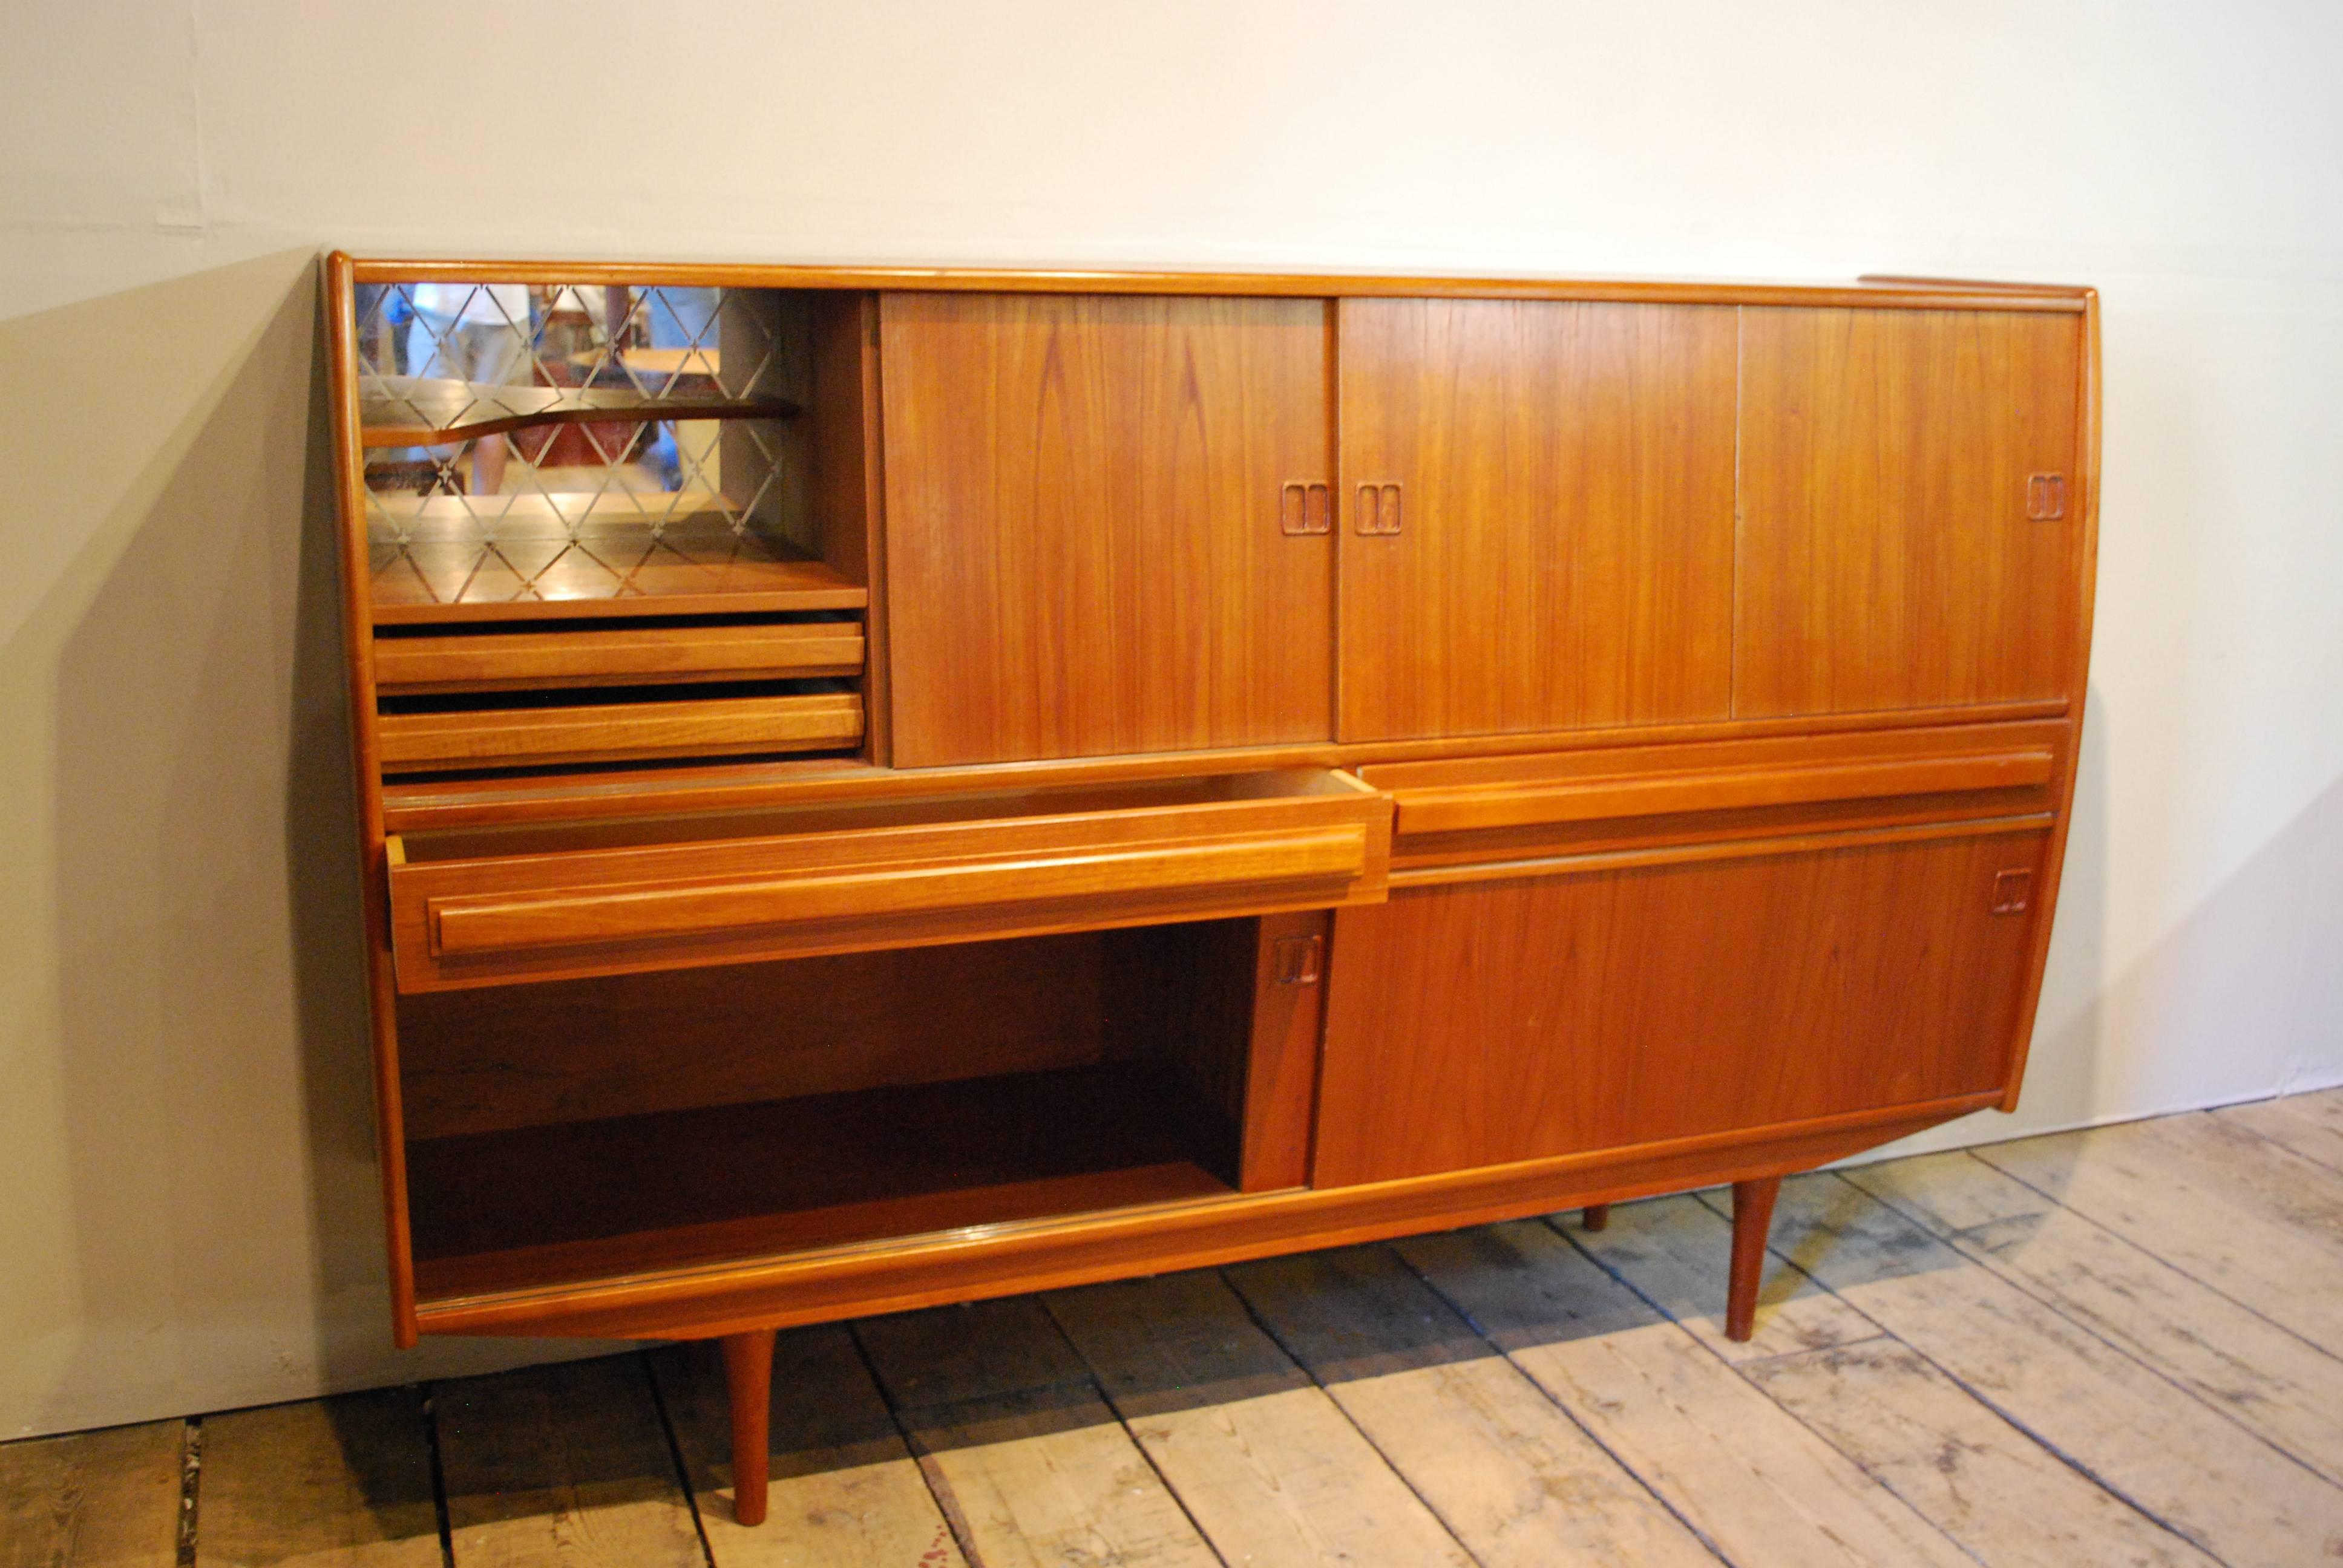 Danish Modern teak credenza designed by Jens AErthoj Jensen and Tage Molholm who opened BoConcepts in 1952.  It features six doors, quality construction throughout and fabulous storage options including adjustable shelving, felt lined dovetailed